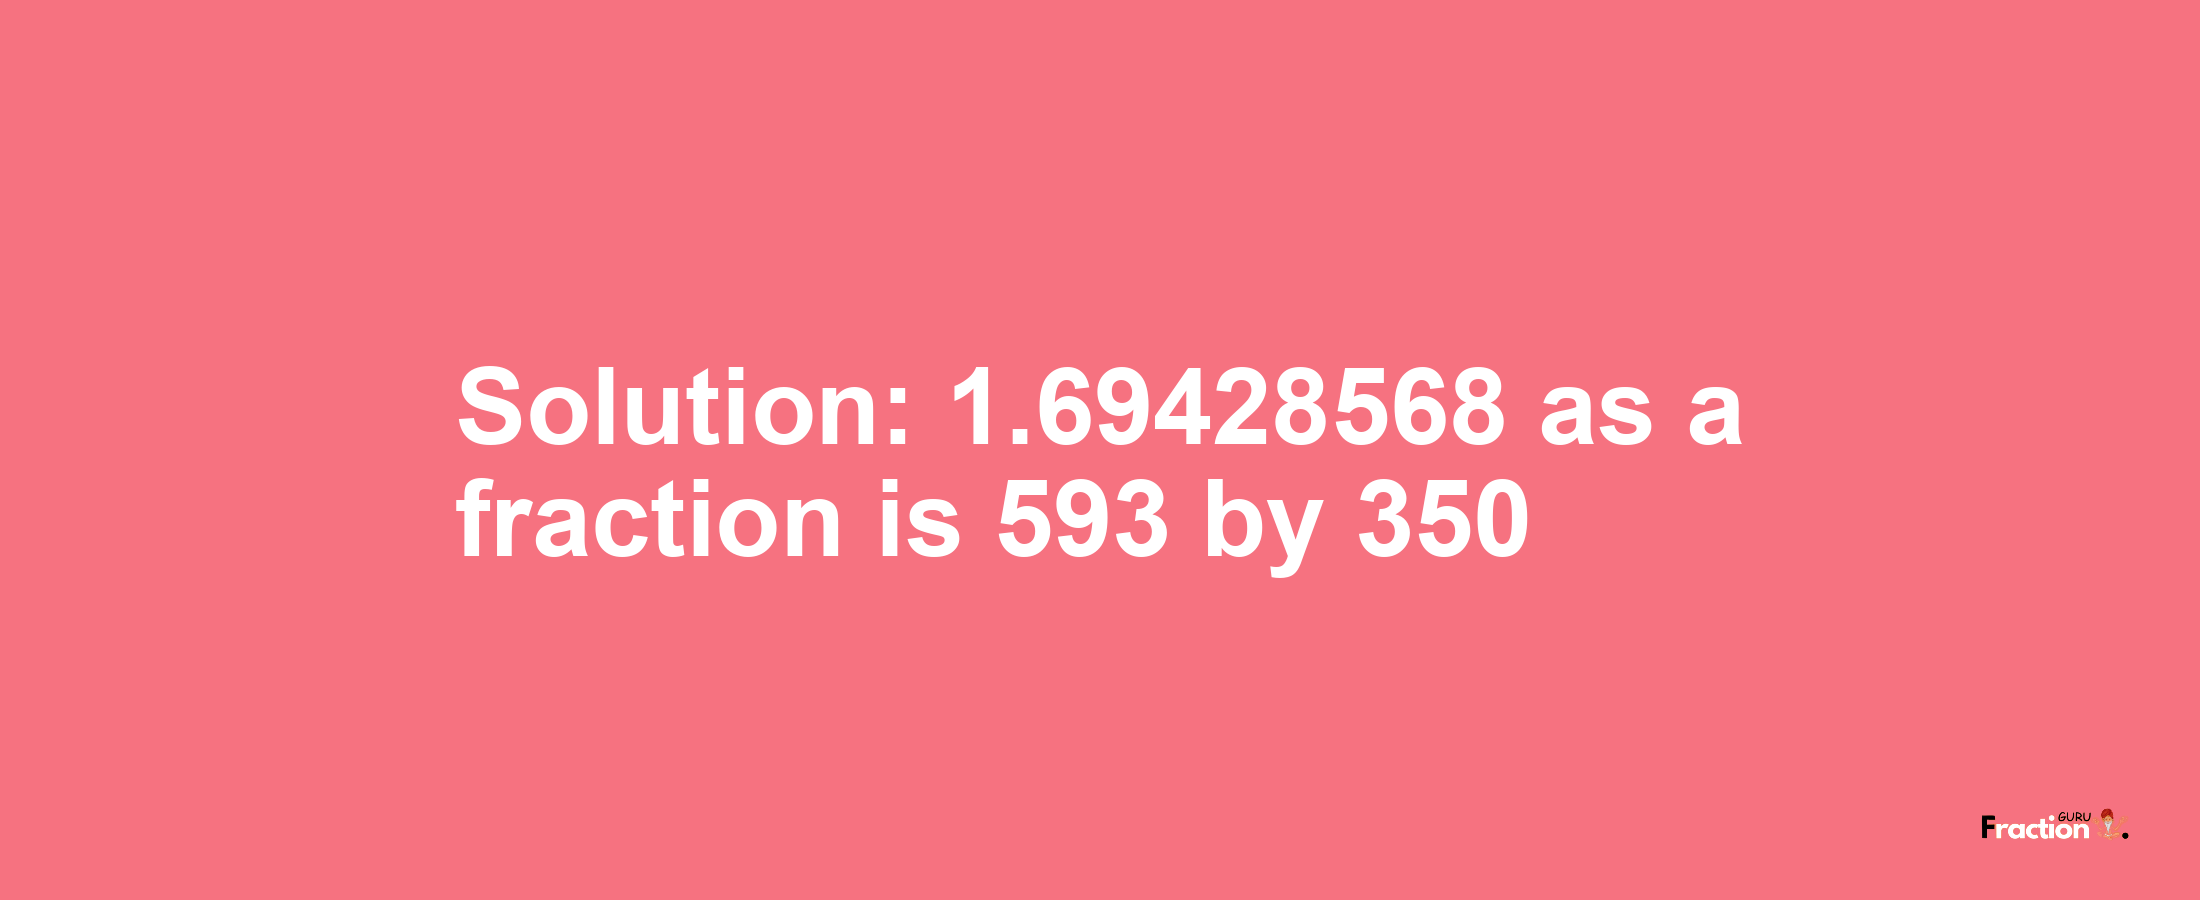 Solution:1.69428568 as a fraction is 593/350